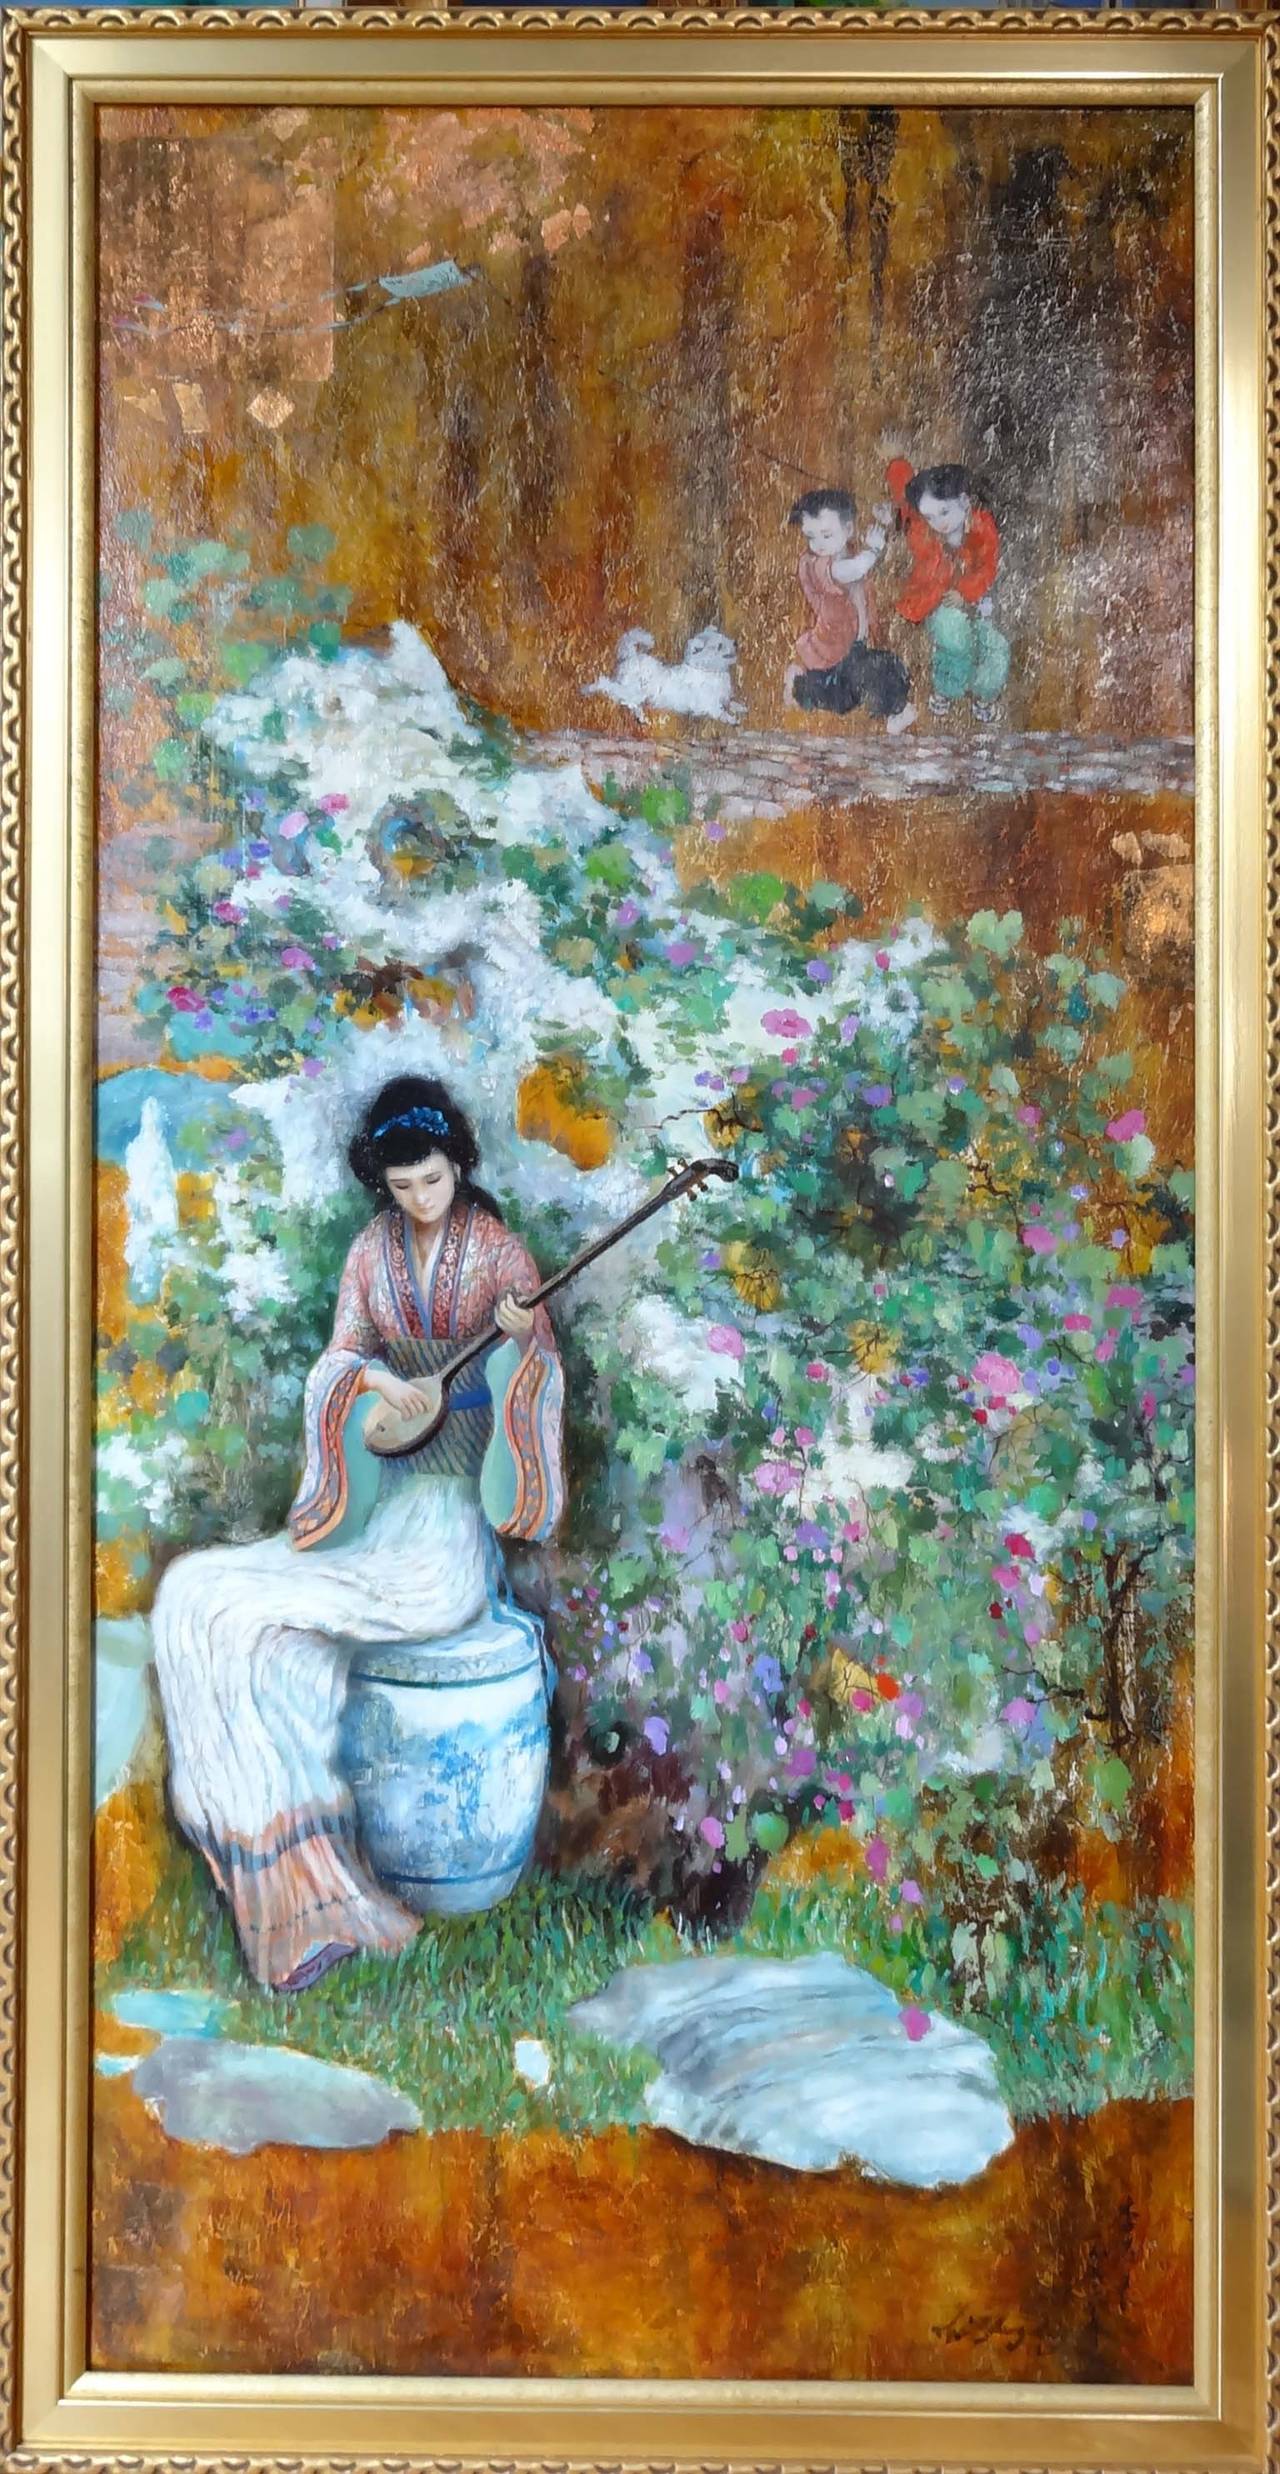 This stunning and ornate screen is painted by the Chinese artist, Li Zhong Liang. As an artist, he flawlessly combines Classicism, Realism and Impressionism to create a unique mood and captivate his viewer. Each panel of the screen is beautiful on